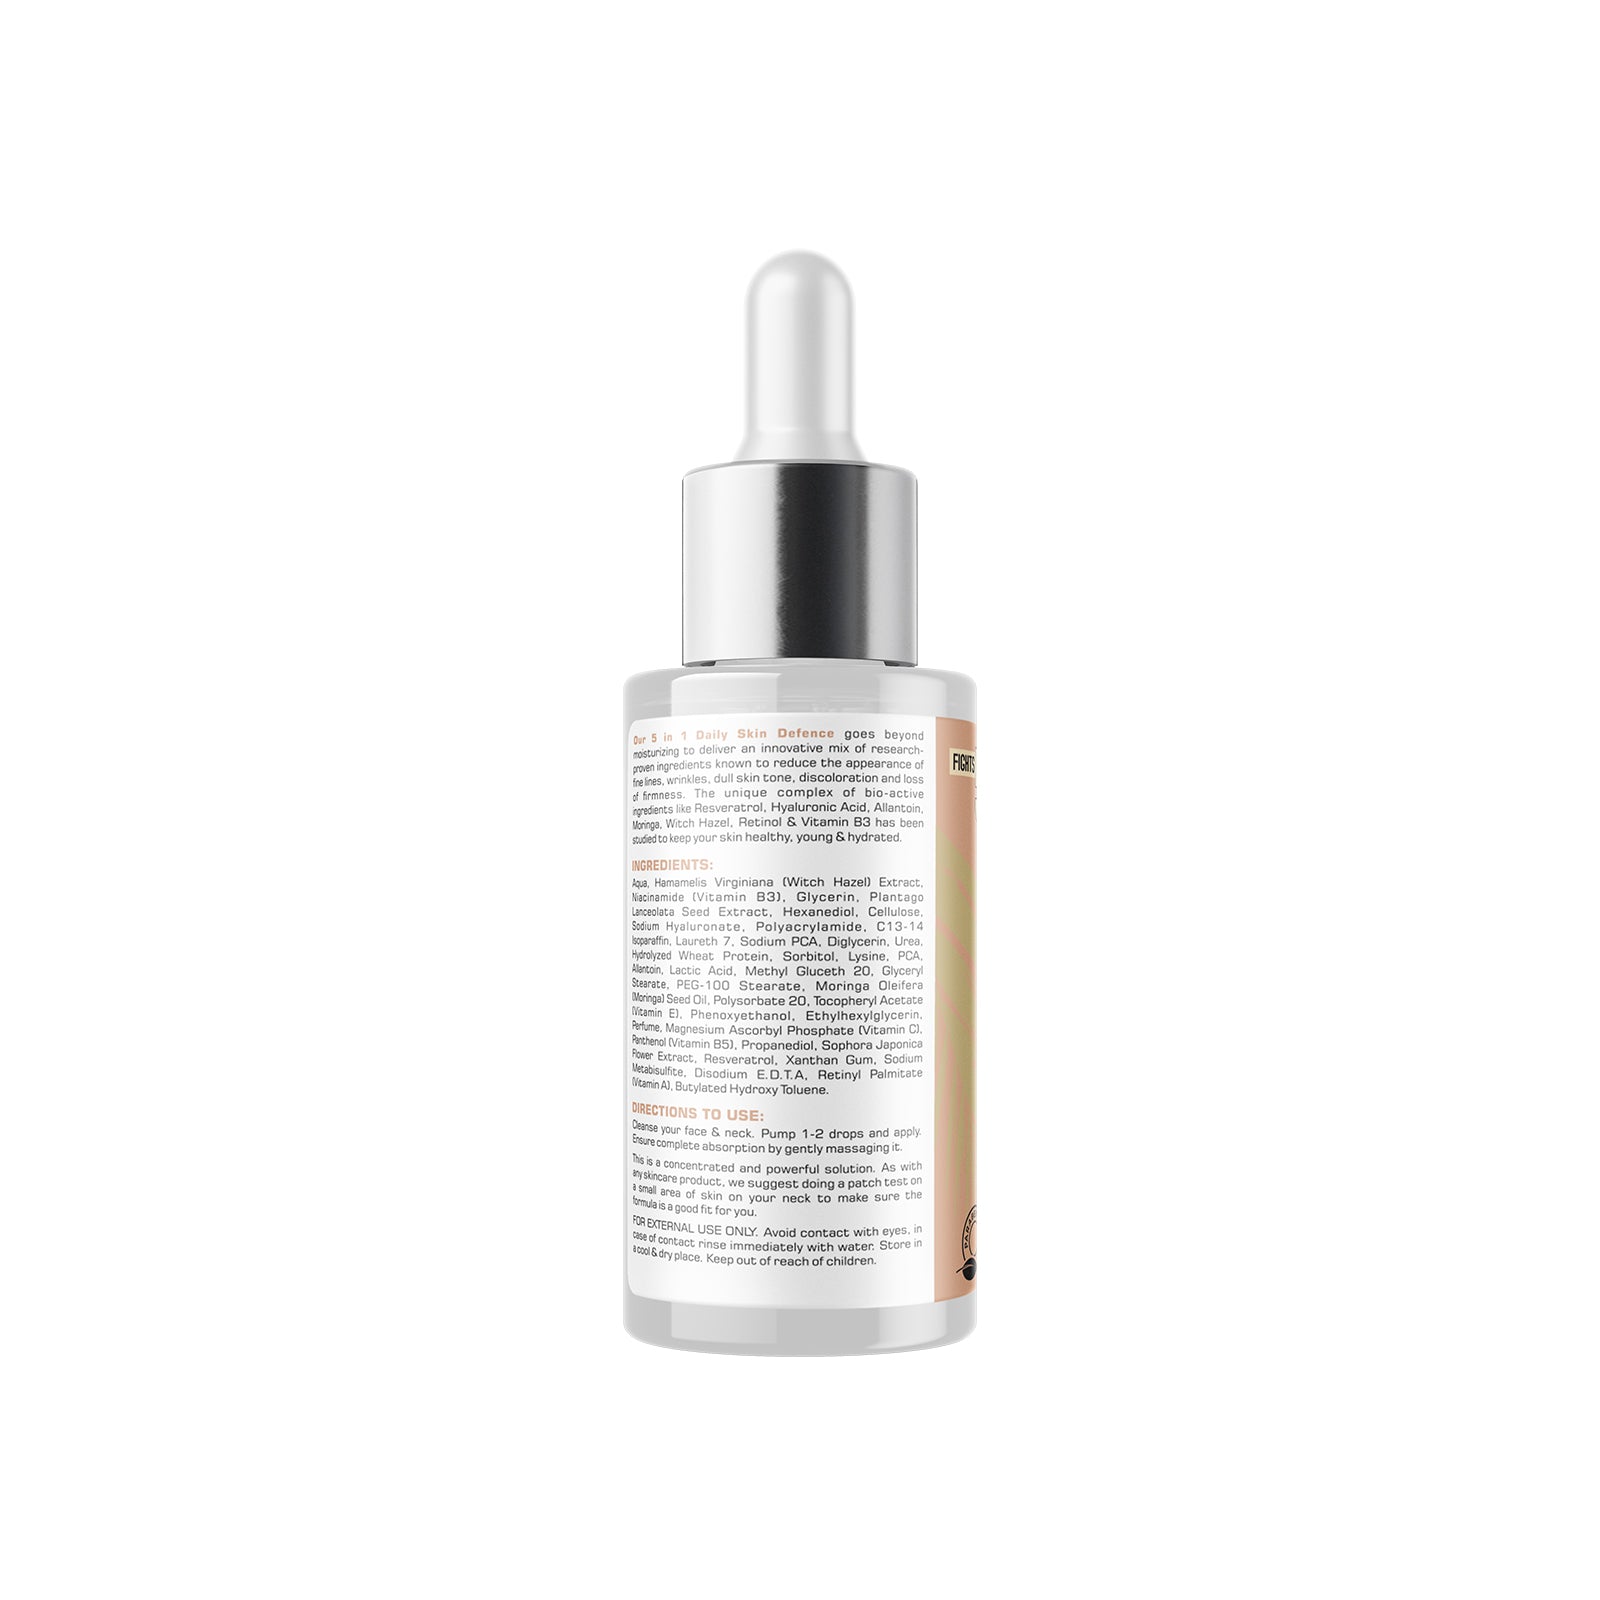 The Skin Story Anti-Ageing Face Serum | For Wrinkles, Fine Lines & Discoloration | Hyaluronic Acid , Niacinamide , Reseveratrol |All Skin Types |Dermatologically Tested|  40ml